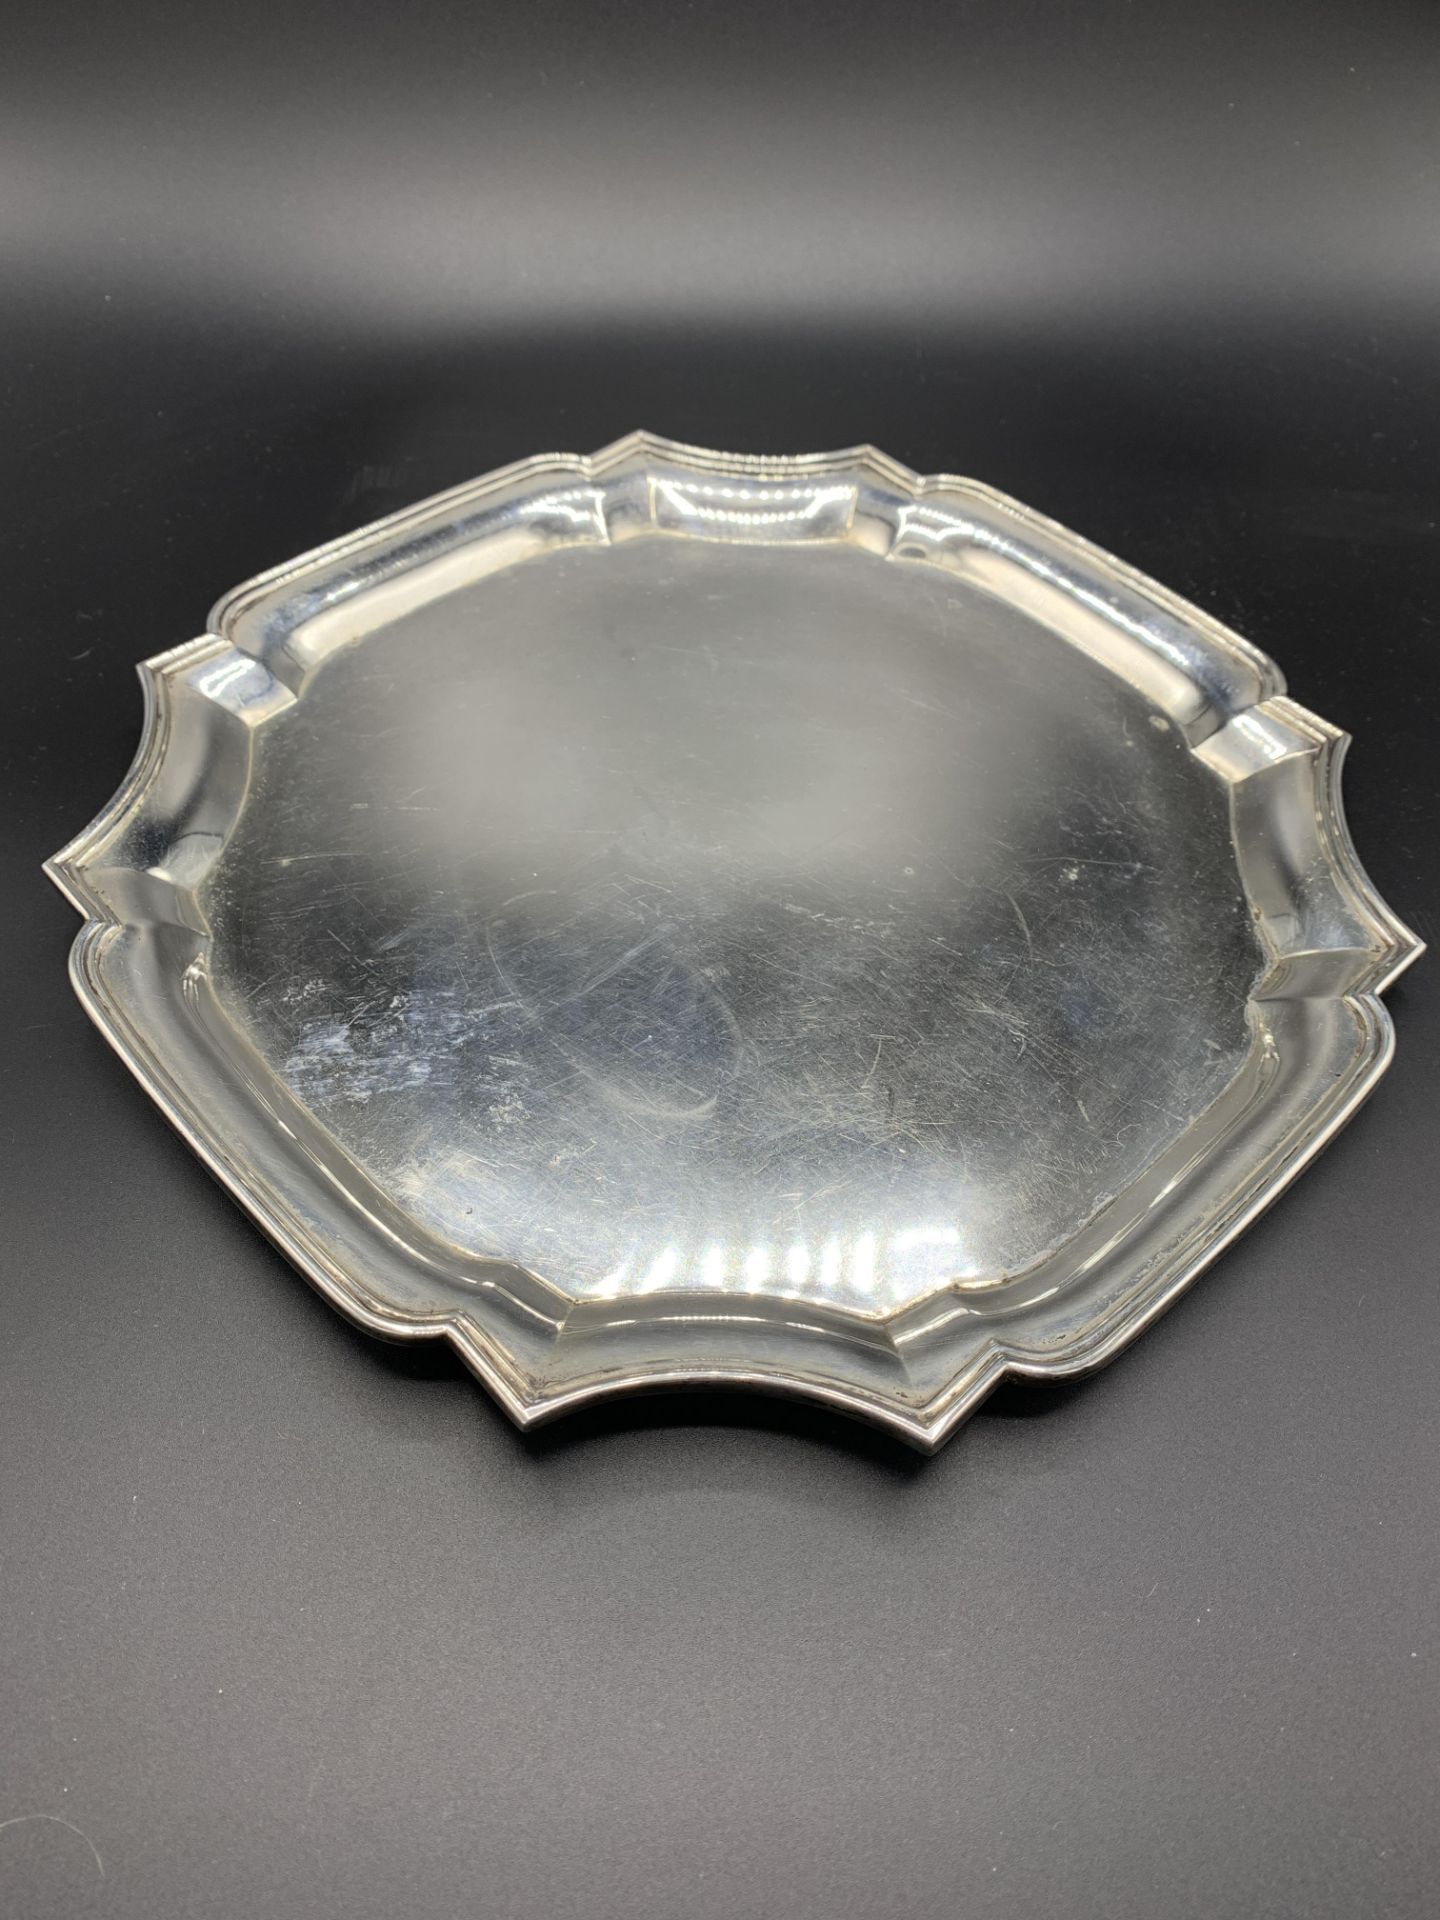 American made sterling silver tray - Image 2 of 3